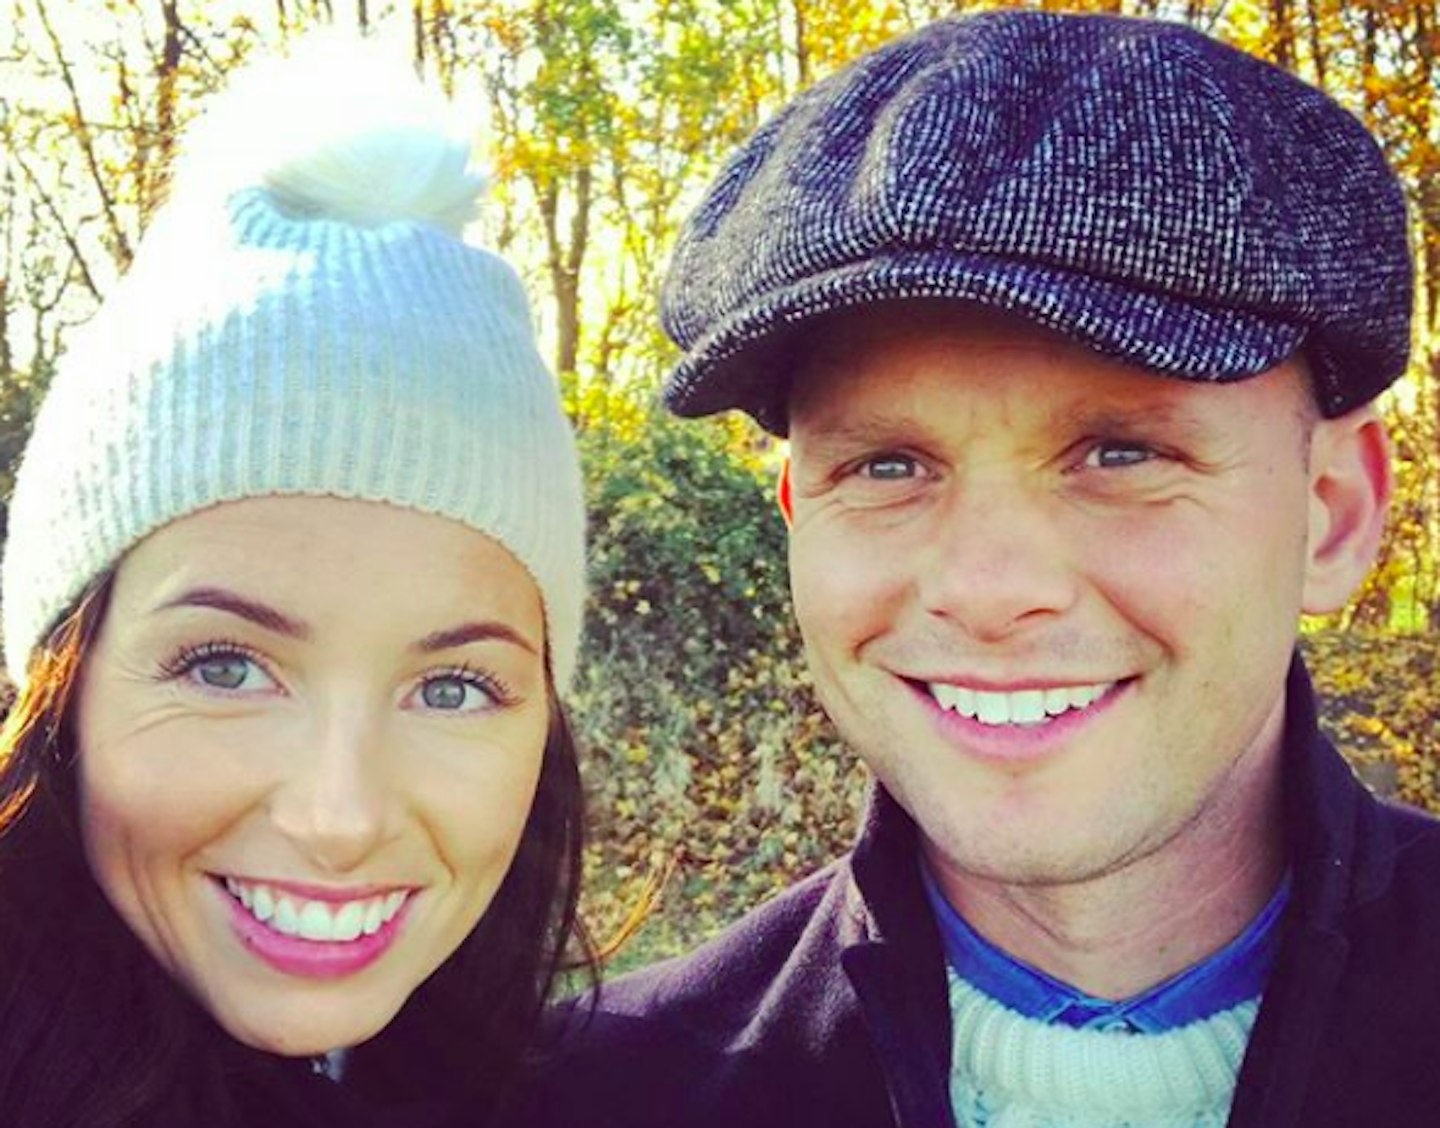 kate-dwyer-posts-picture-jeff-brazier-sons